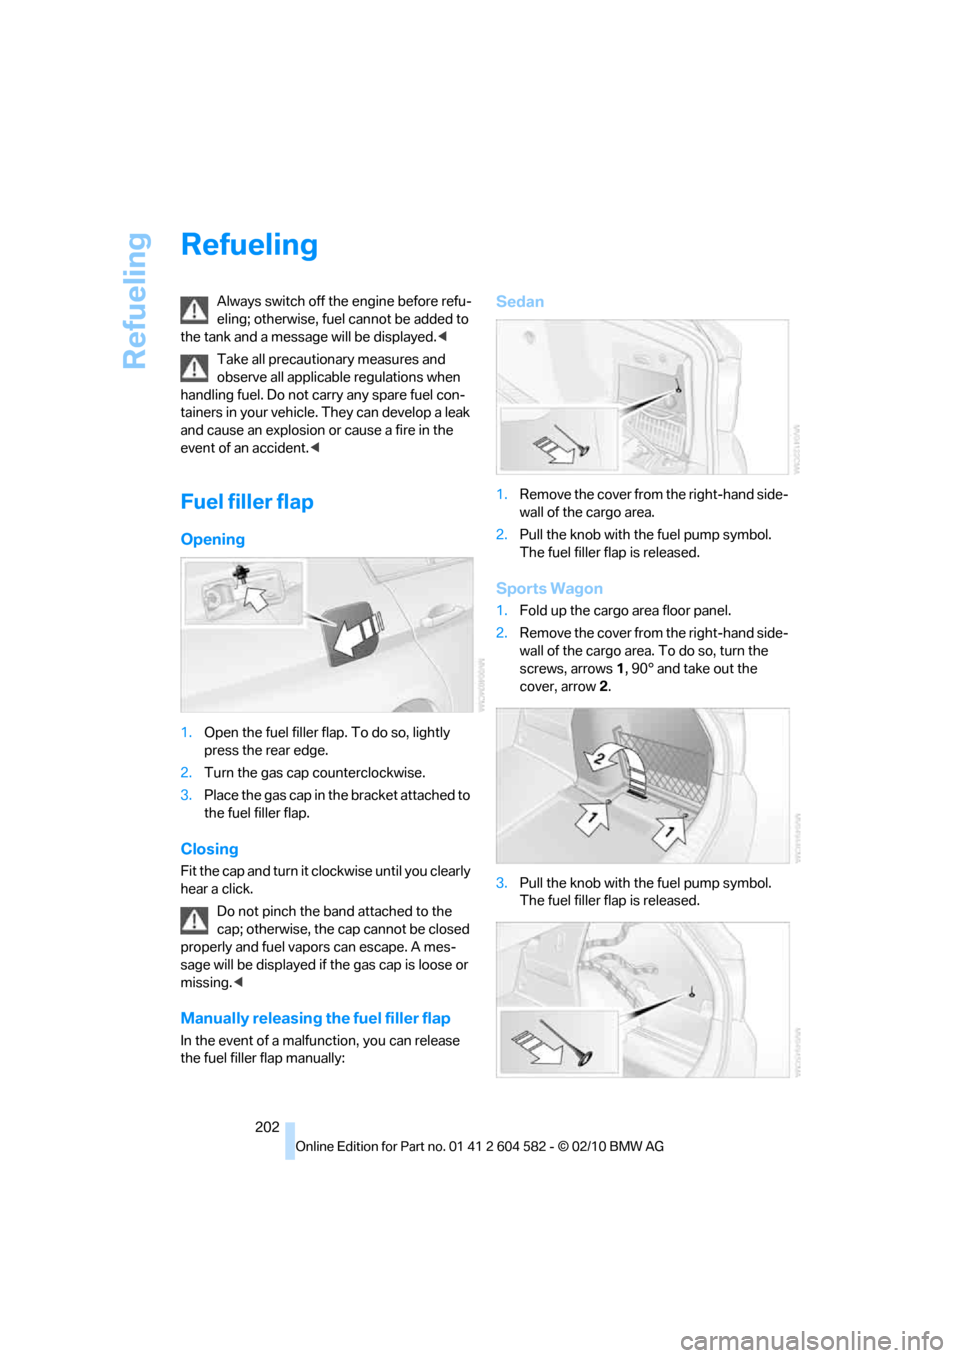 BMW 323I 2011 E90 Owners Manual Refueling
202
Refueling
Always switch off the engine before refu-
eling; otherwise, fuel cannot be added to 
the tank and a message will be displayed.<
Take all precautionary measures and 
observe all